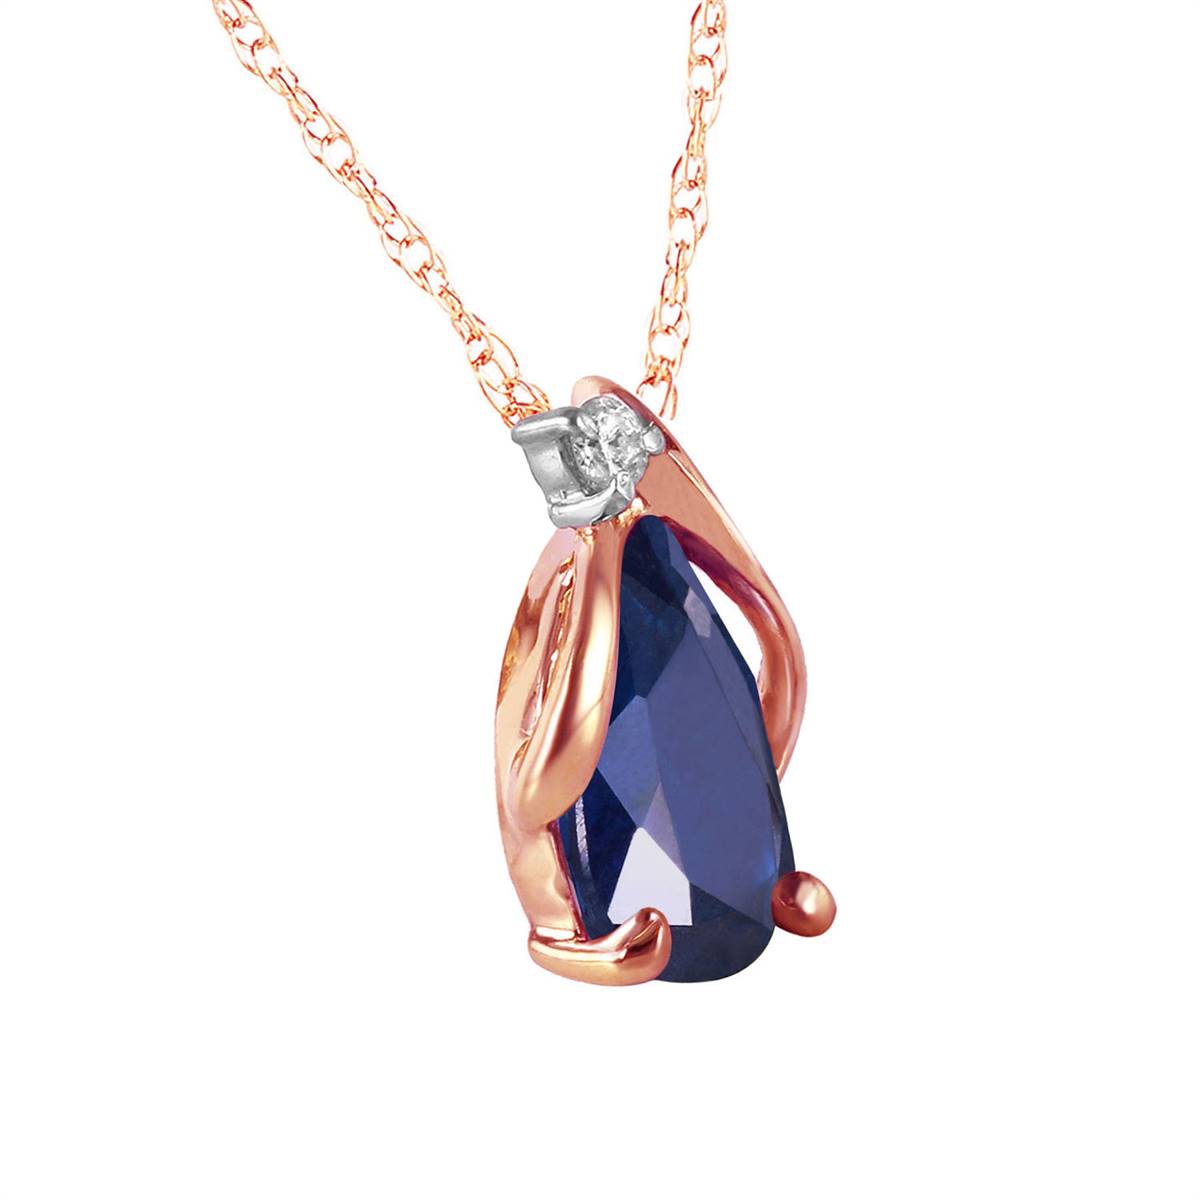 14K Solid Rose Gold Natural Diamond & Sapphire Necklace Certified